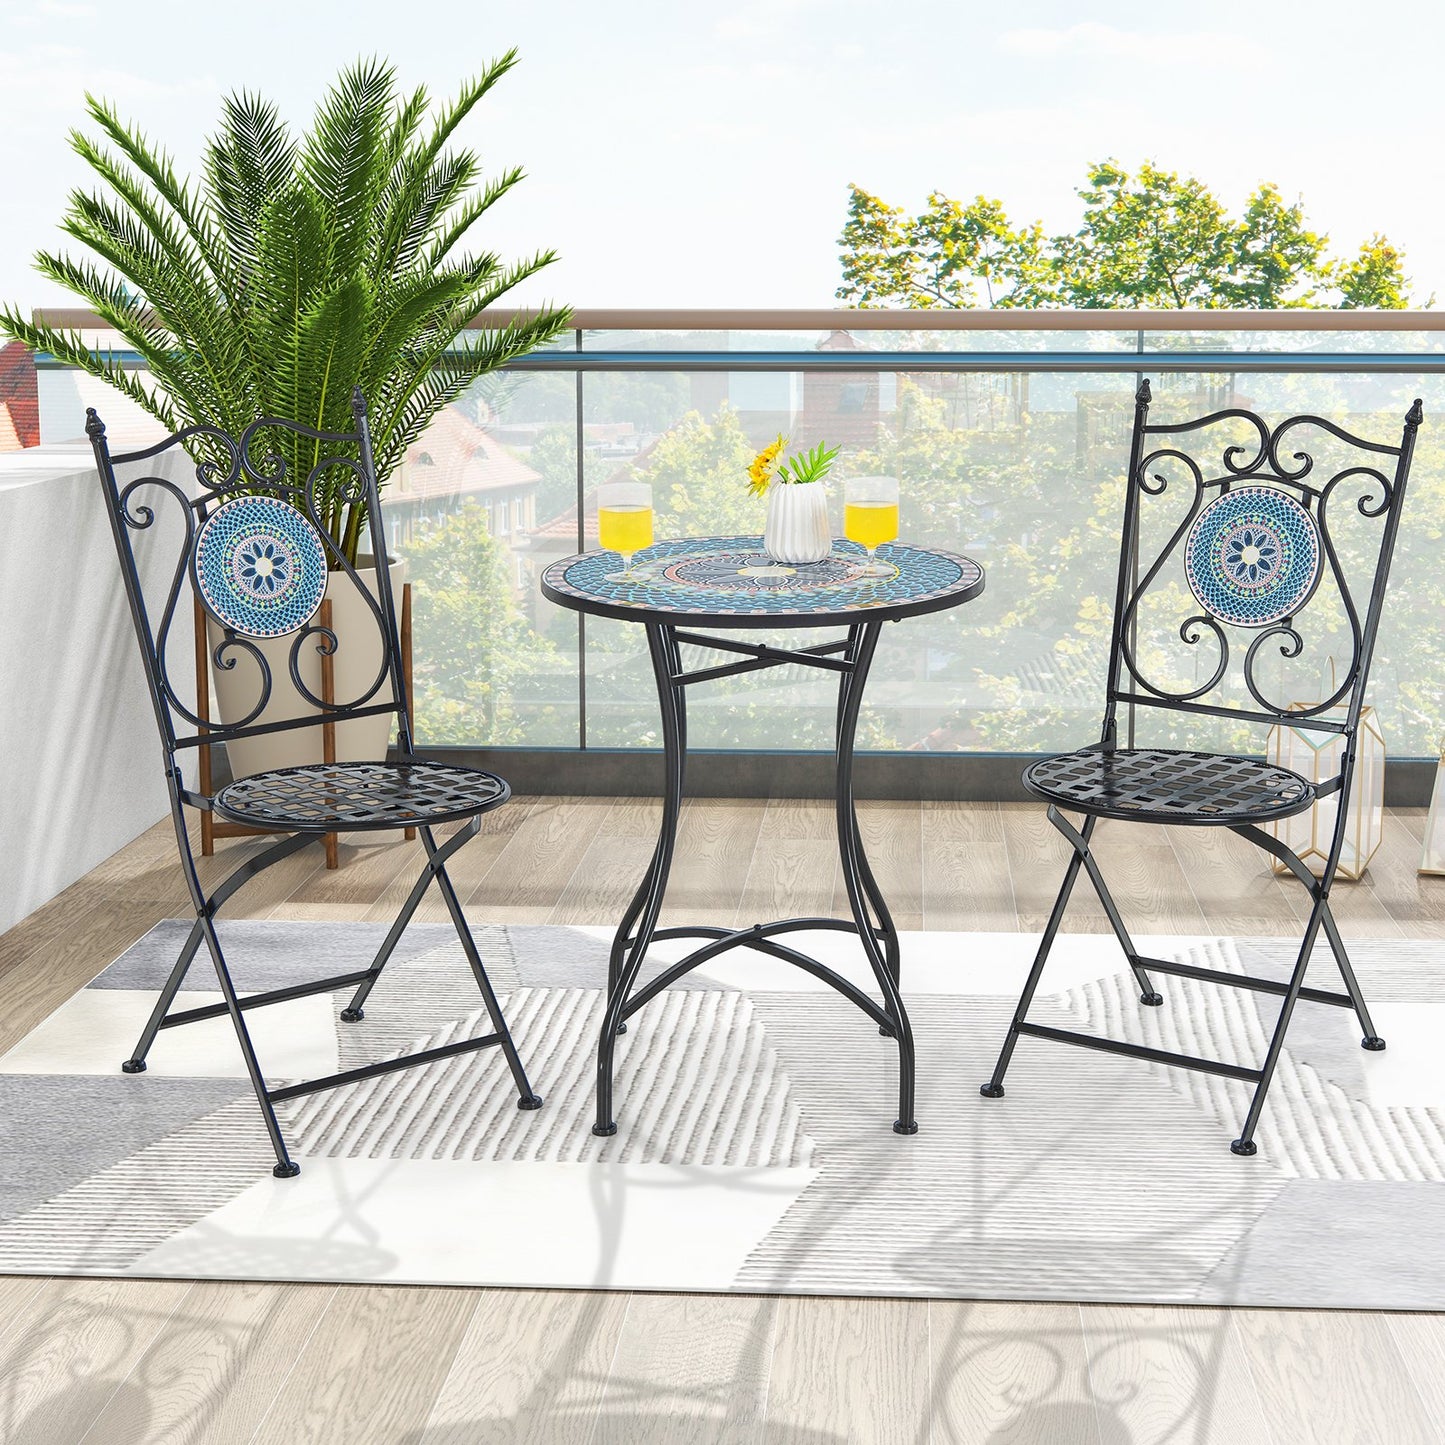 Set of 2 Mosaic Chairs for Patio Metal Folding Chairs-A, Black